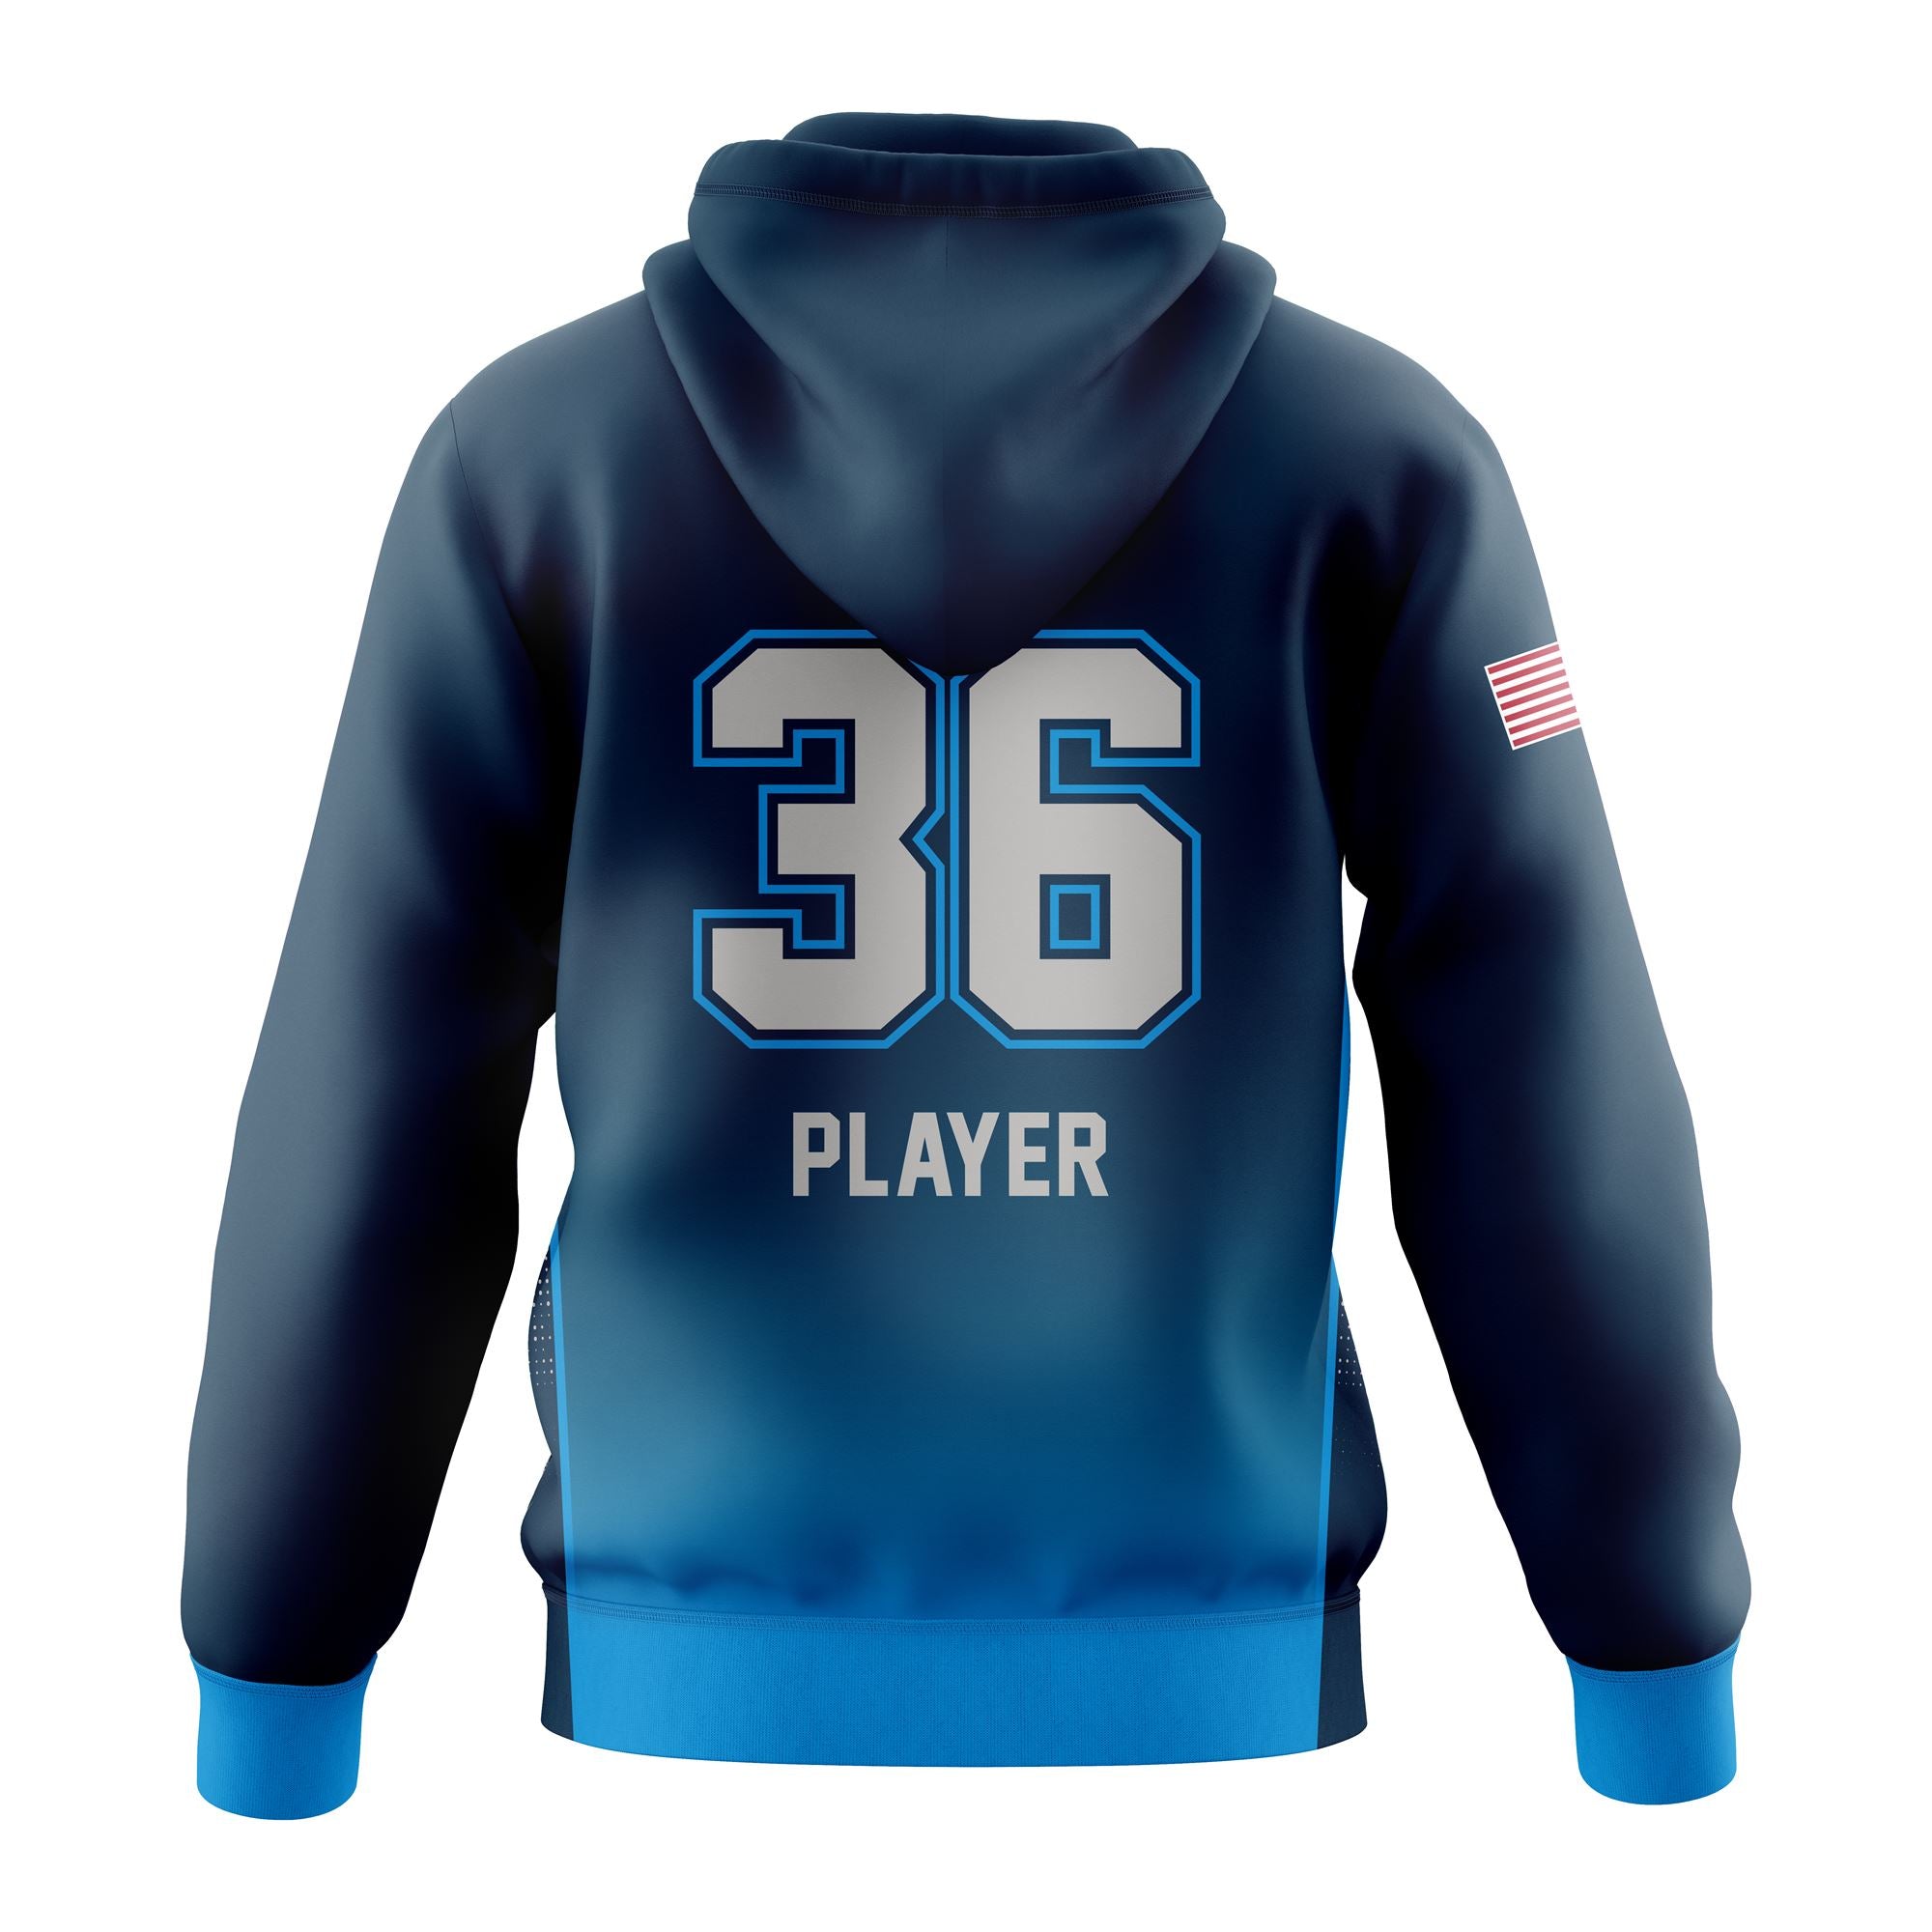 Monmouth Bulldogs Sublimated Hoodie V1